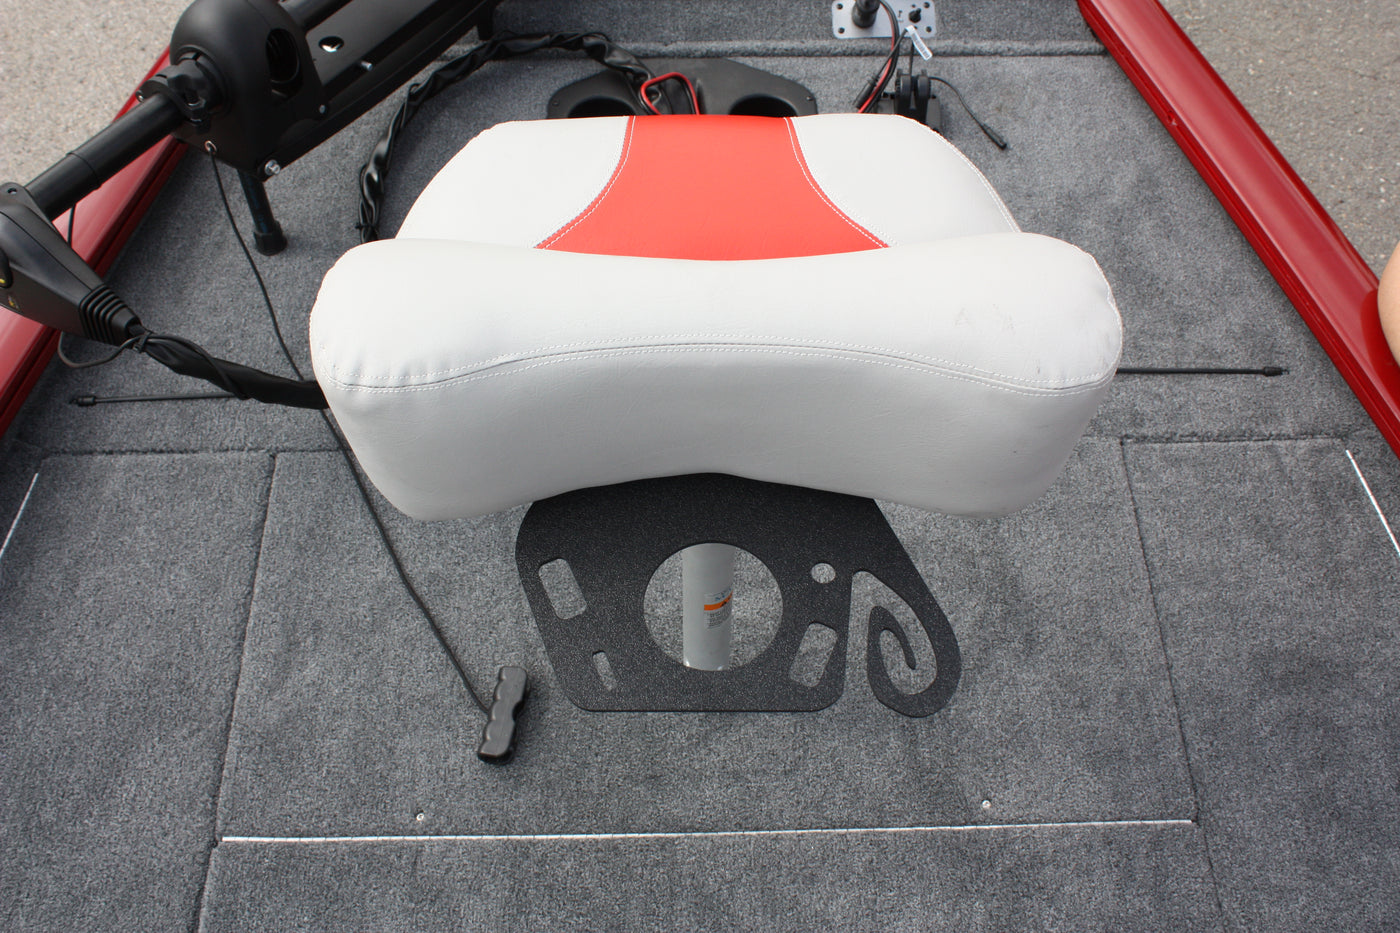 BOAT SEAT TOOL CADDY